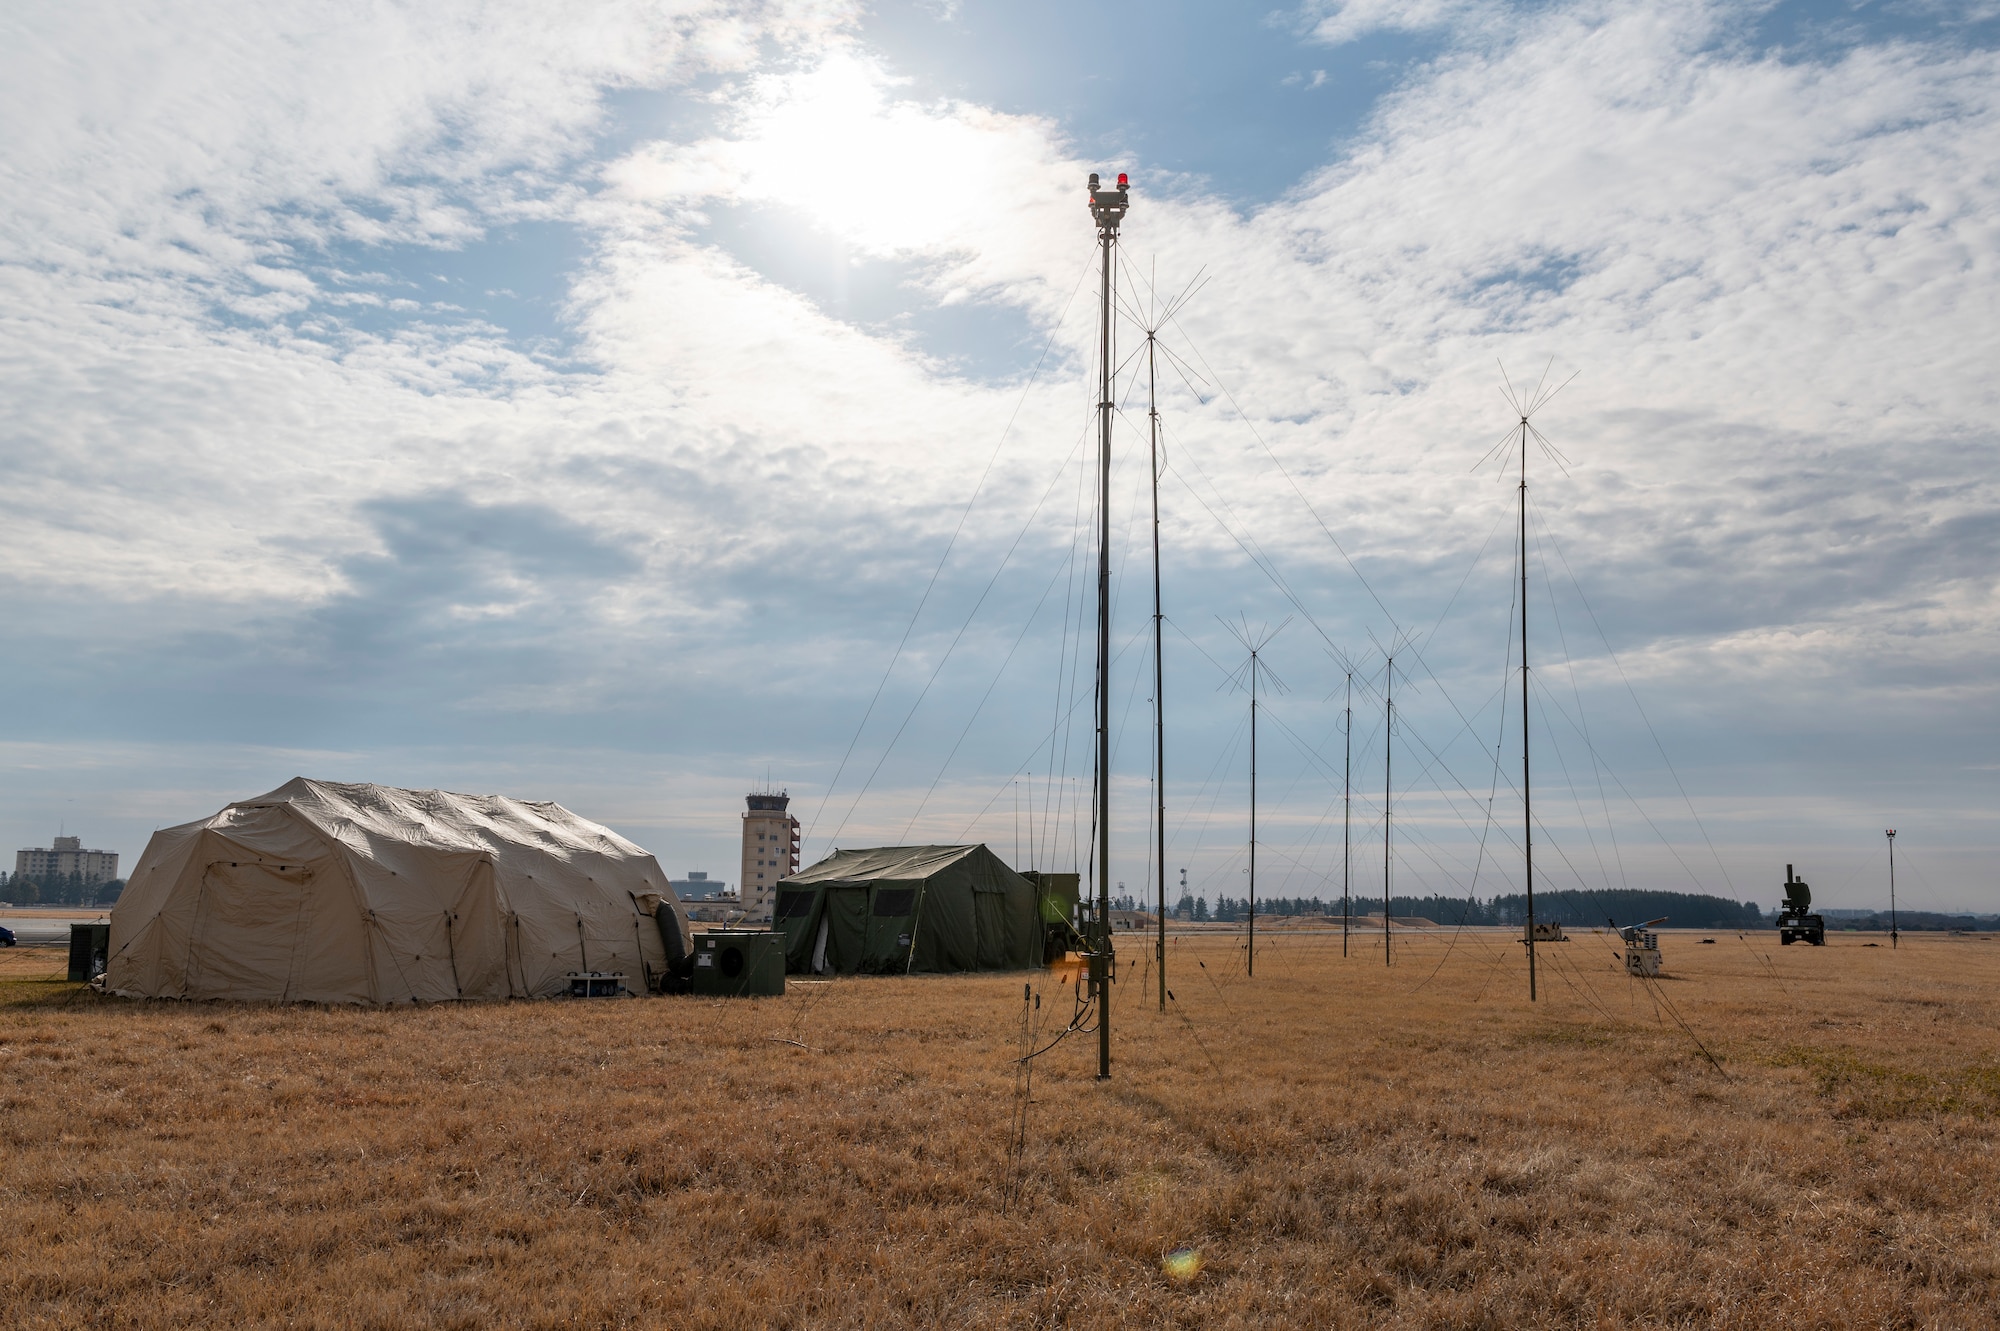 A tower looms over a tent, two military jeeps and several antennas stuck into the ground nearby.